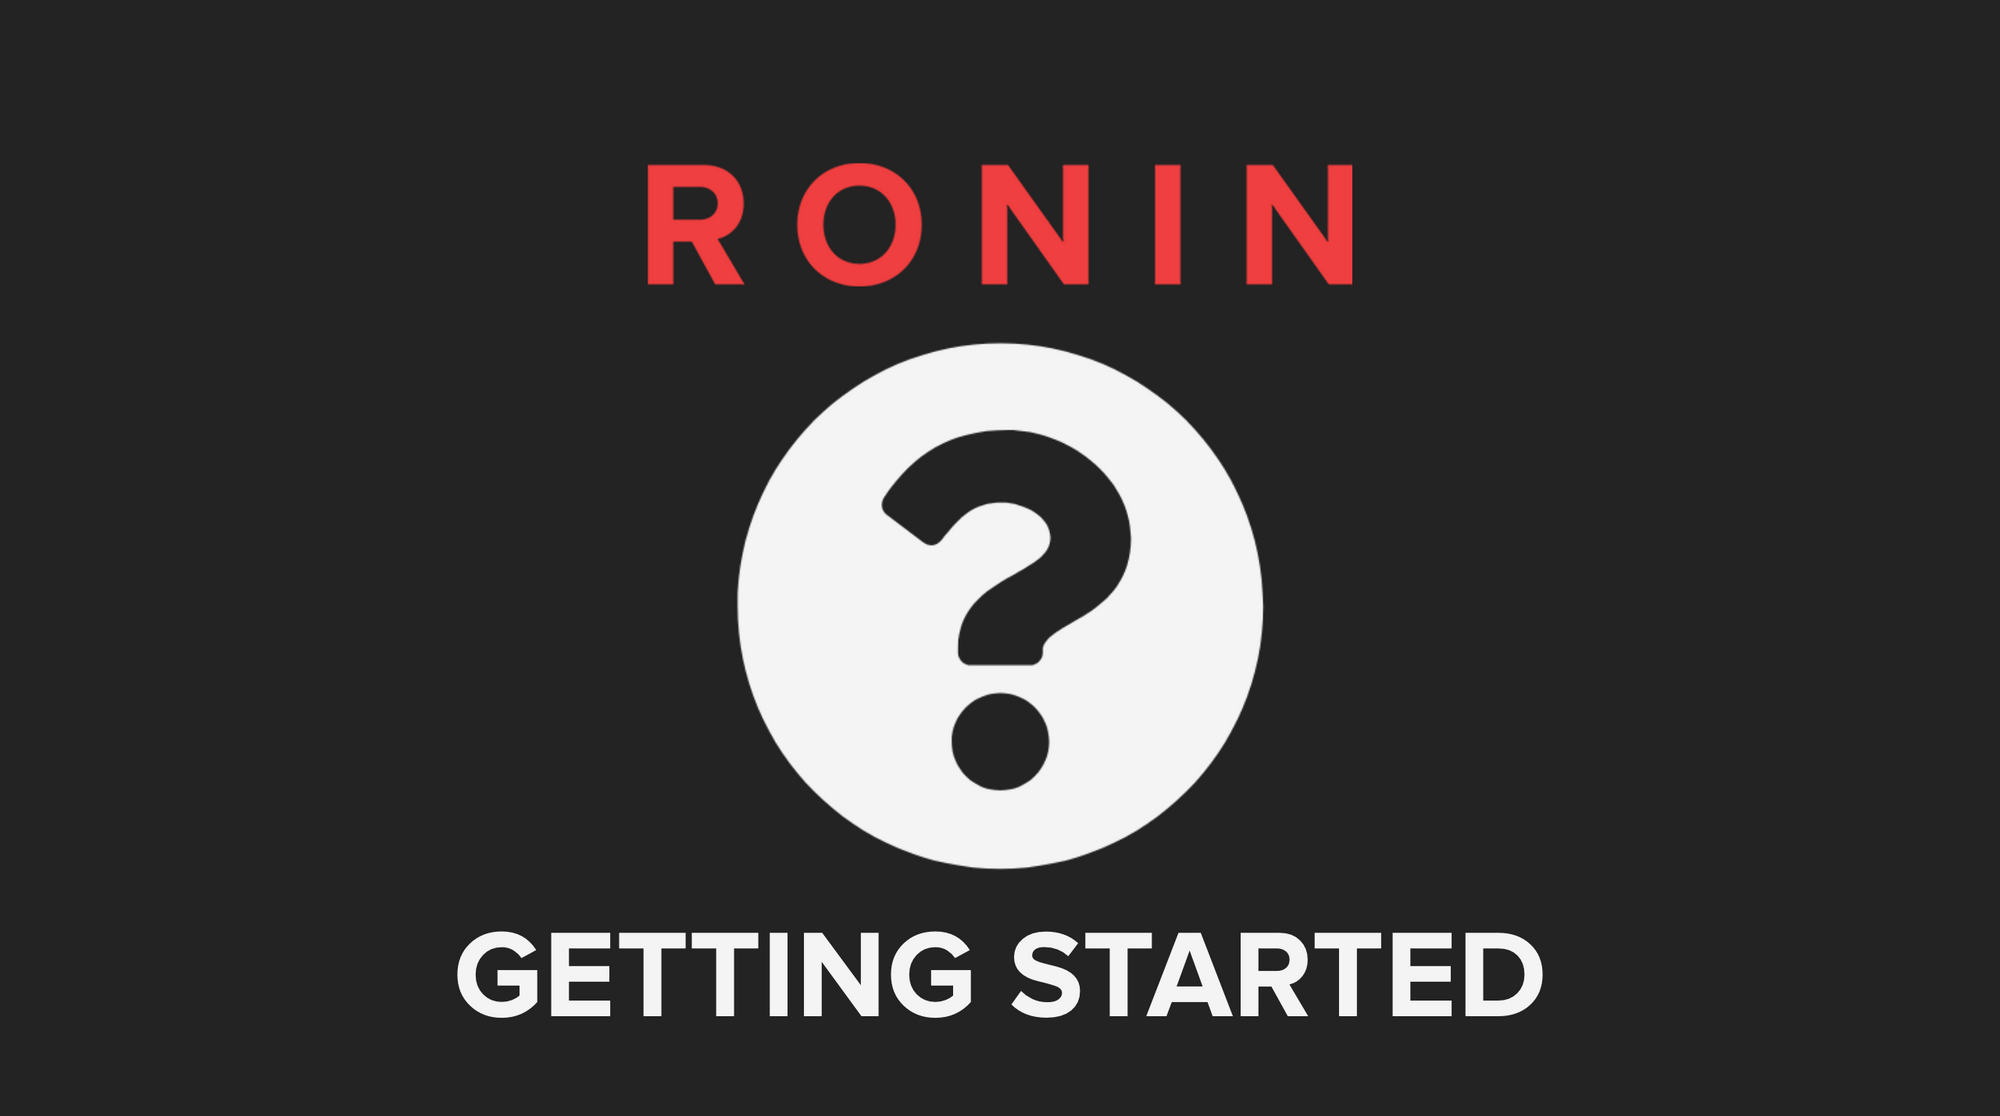 Getting Started with RONIN